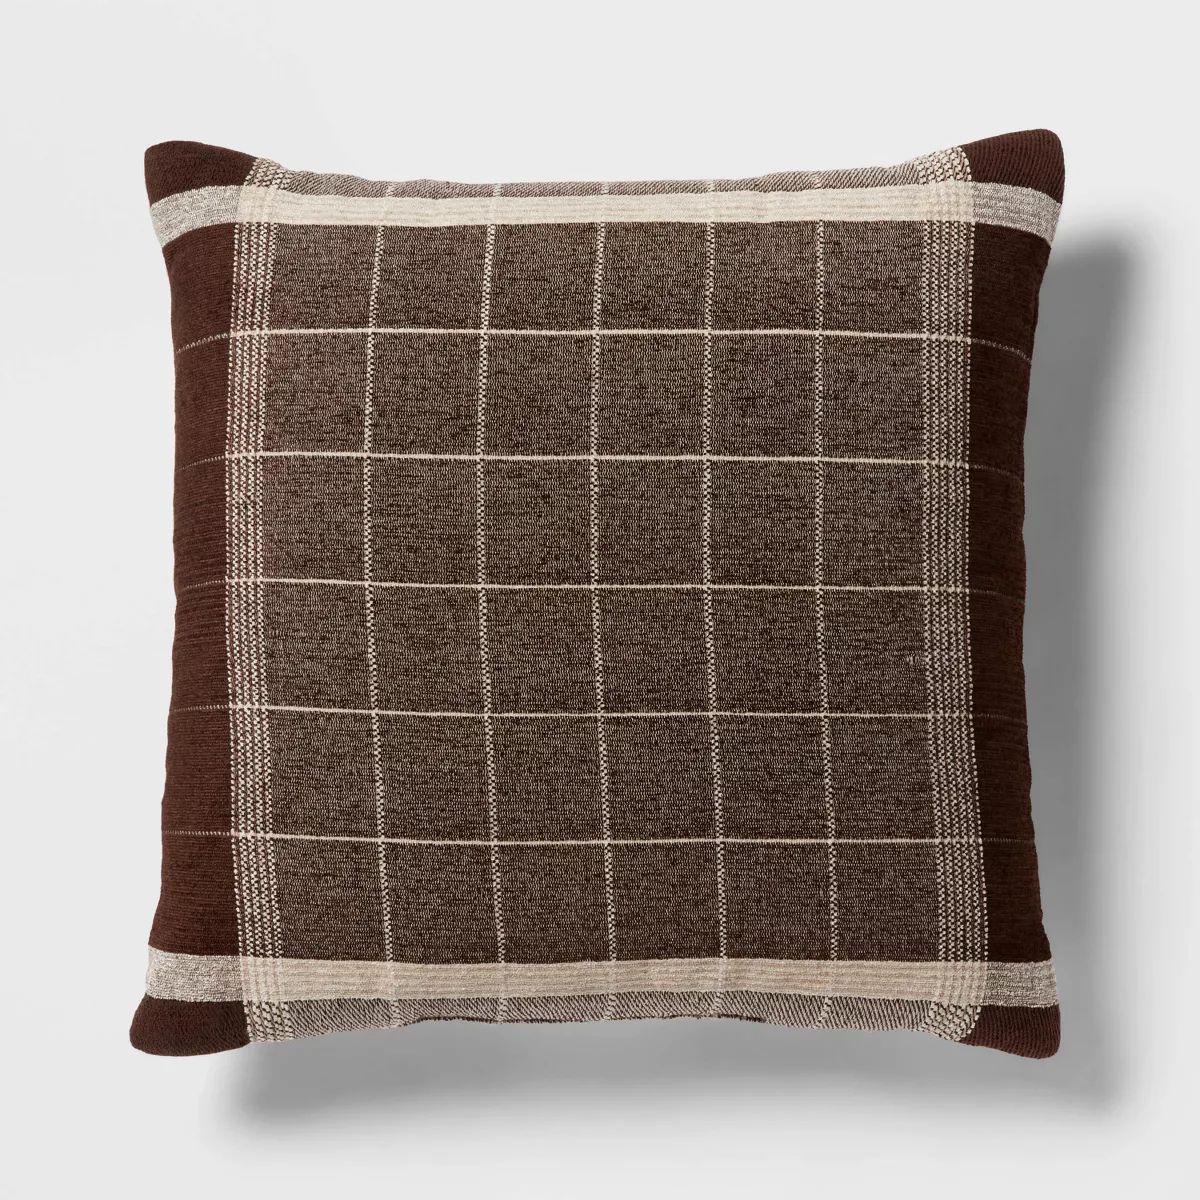 24"x24" Euro Traditional Woven Plaid Decorative Pillow Brown - Threshold™ | Target